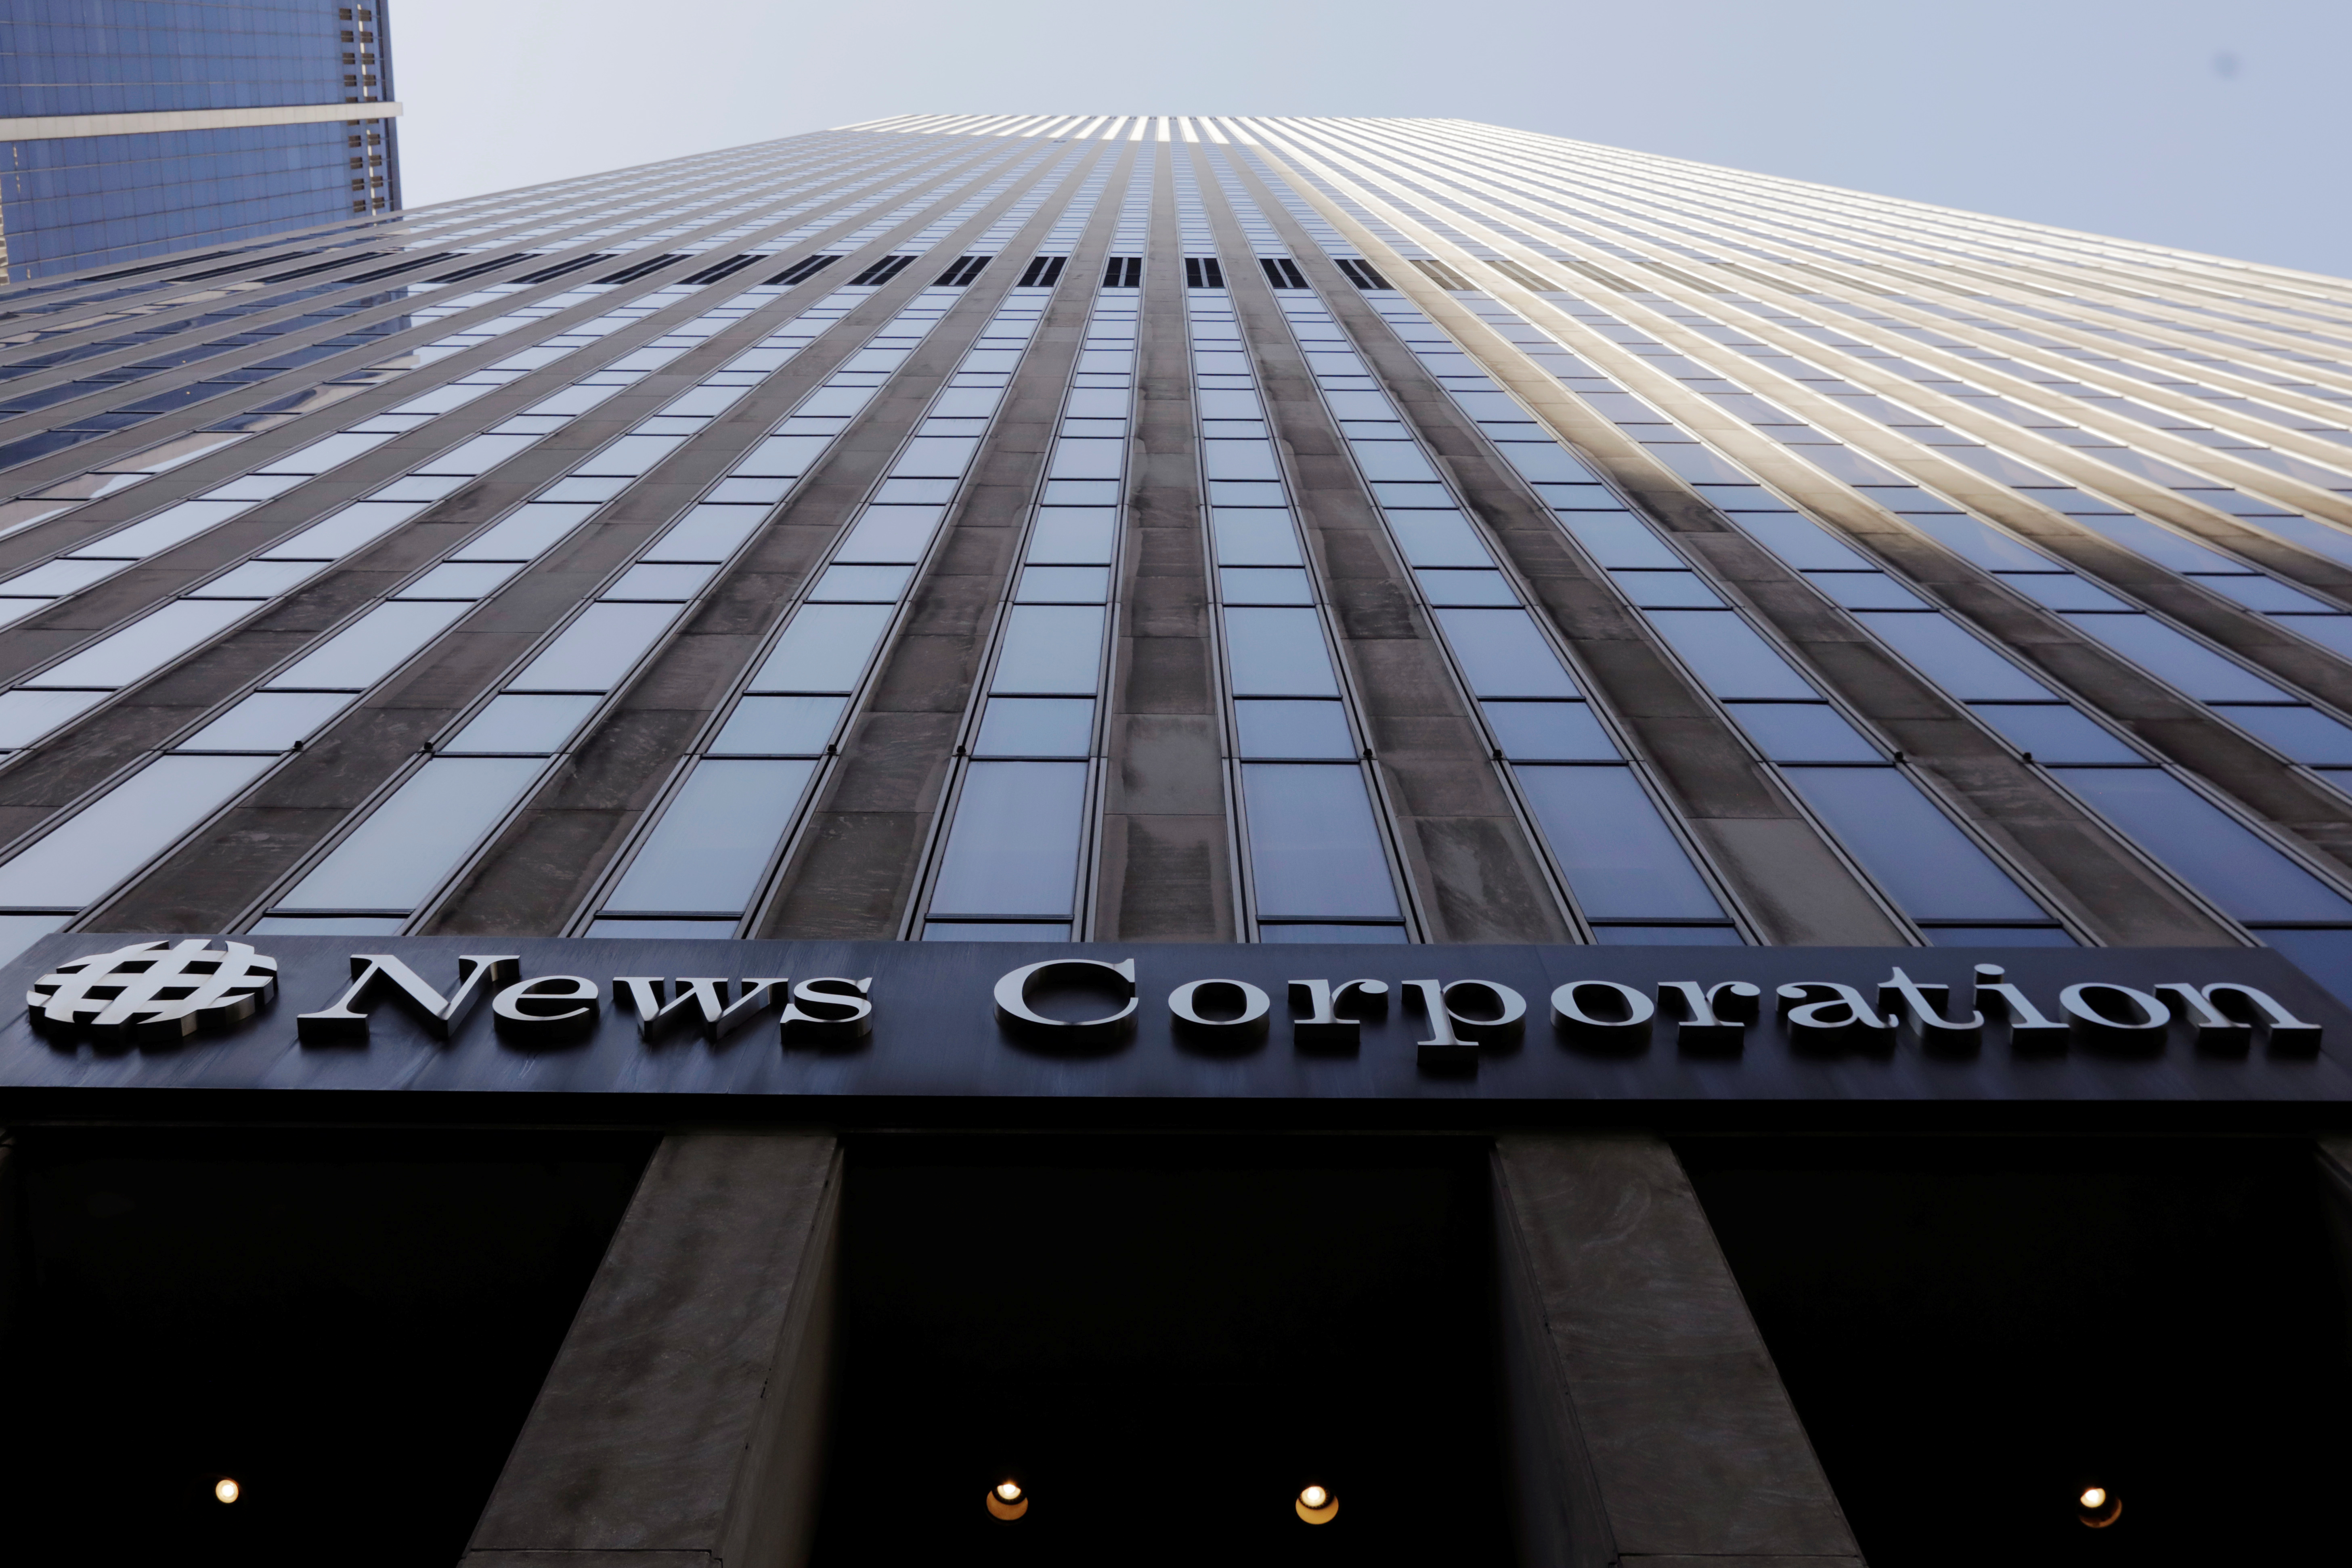 The News Corporation logo is displayed on the side of a building in midtown Manhattan in New York